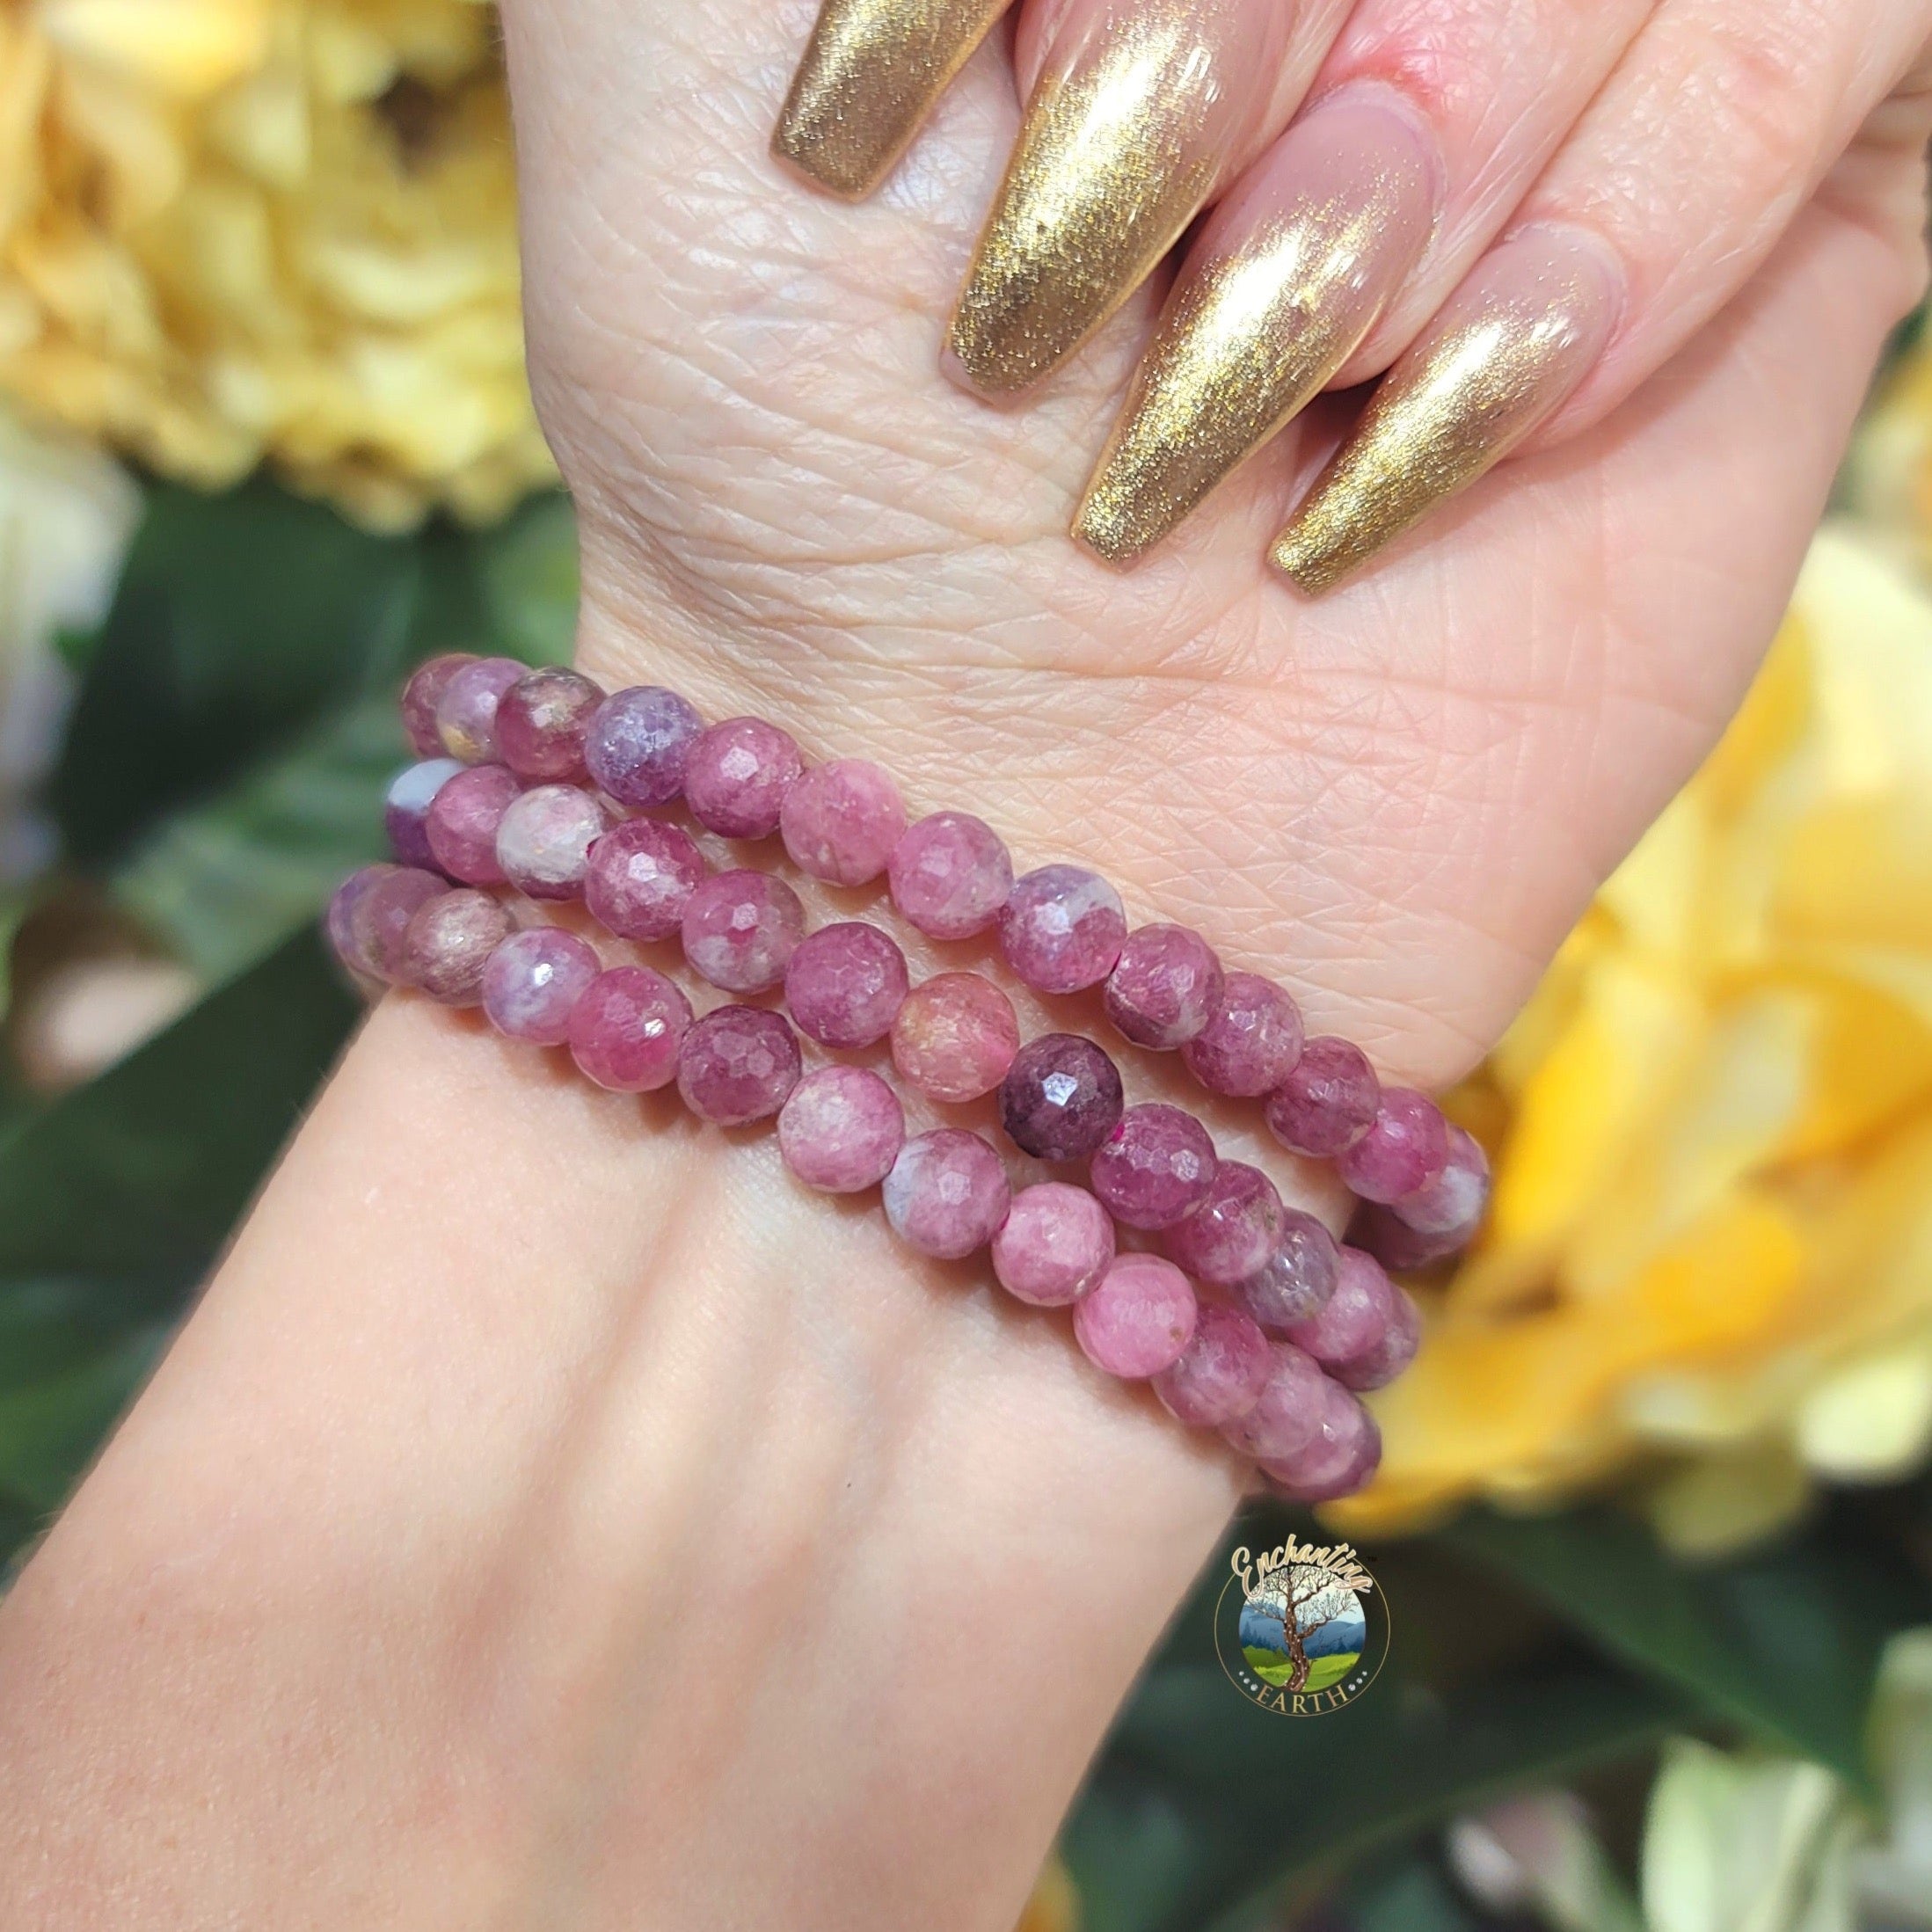 Pink Tourmaline Faceted Bracelet for Compassion, Joy, Opening Heart to Love & Wisdom